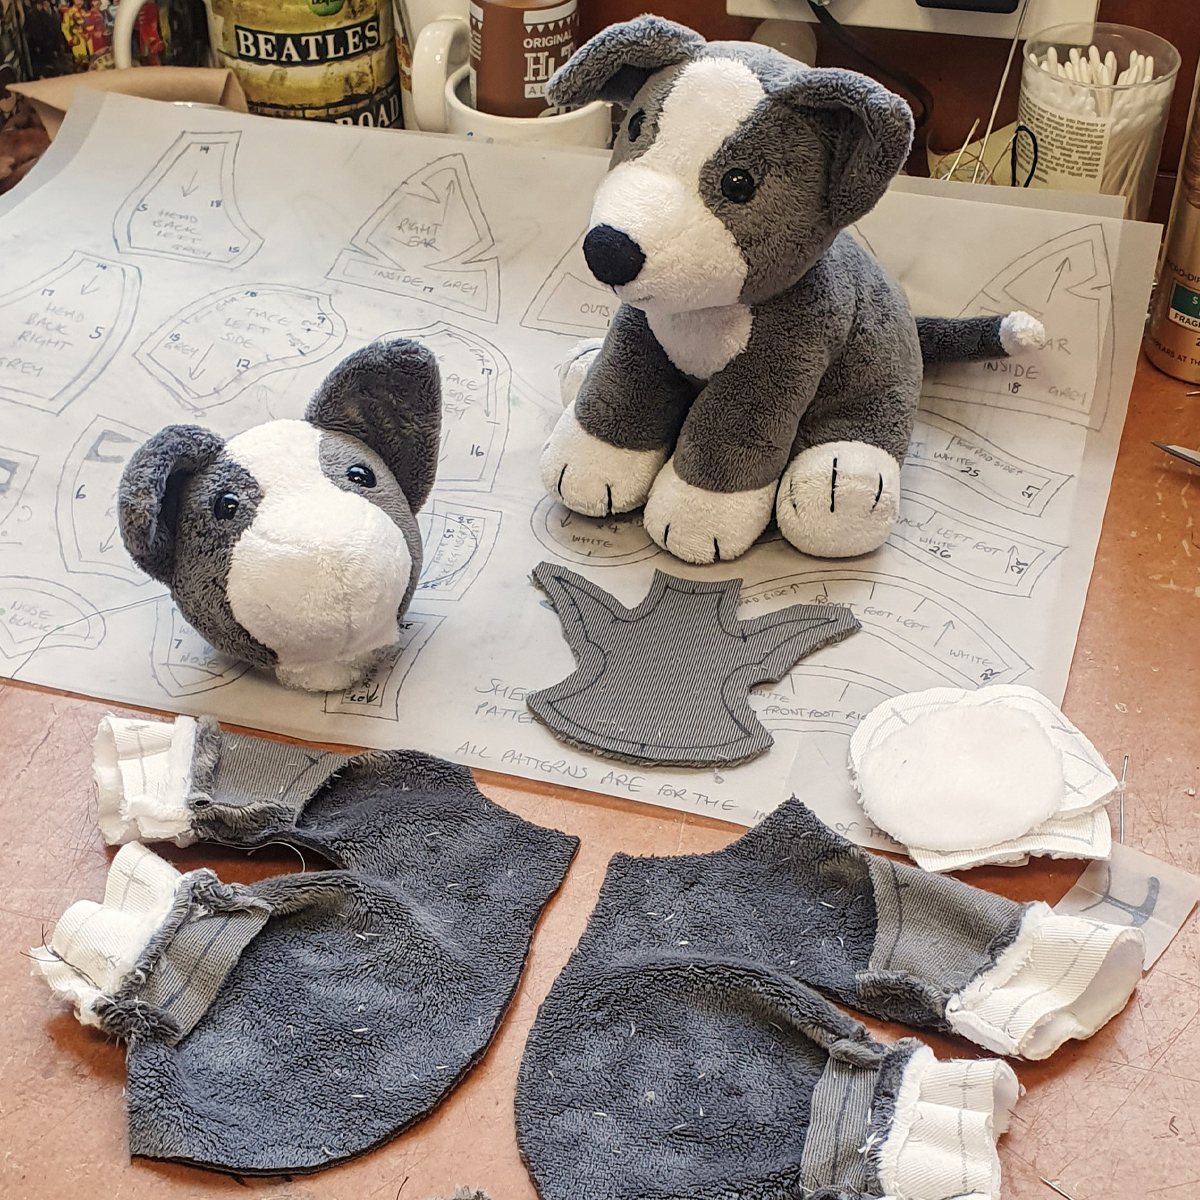 Showing the fabric construction of a Sheppy sheepdog soft toy